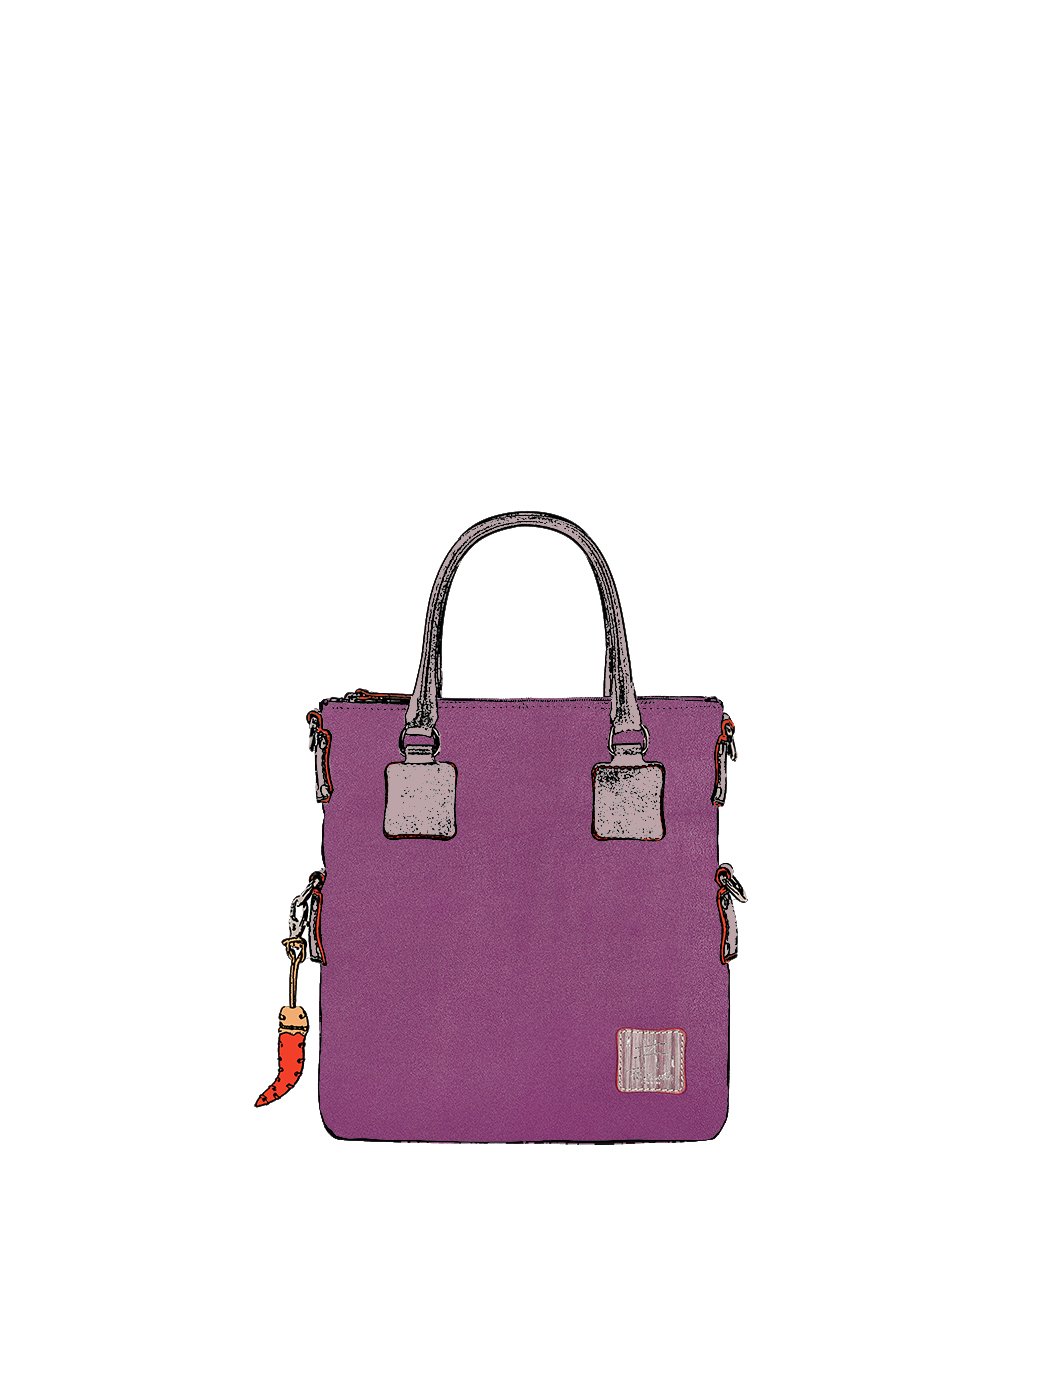 Small Tote Leather Bag in Purple